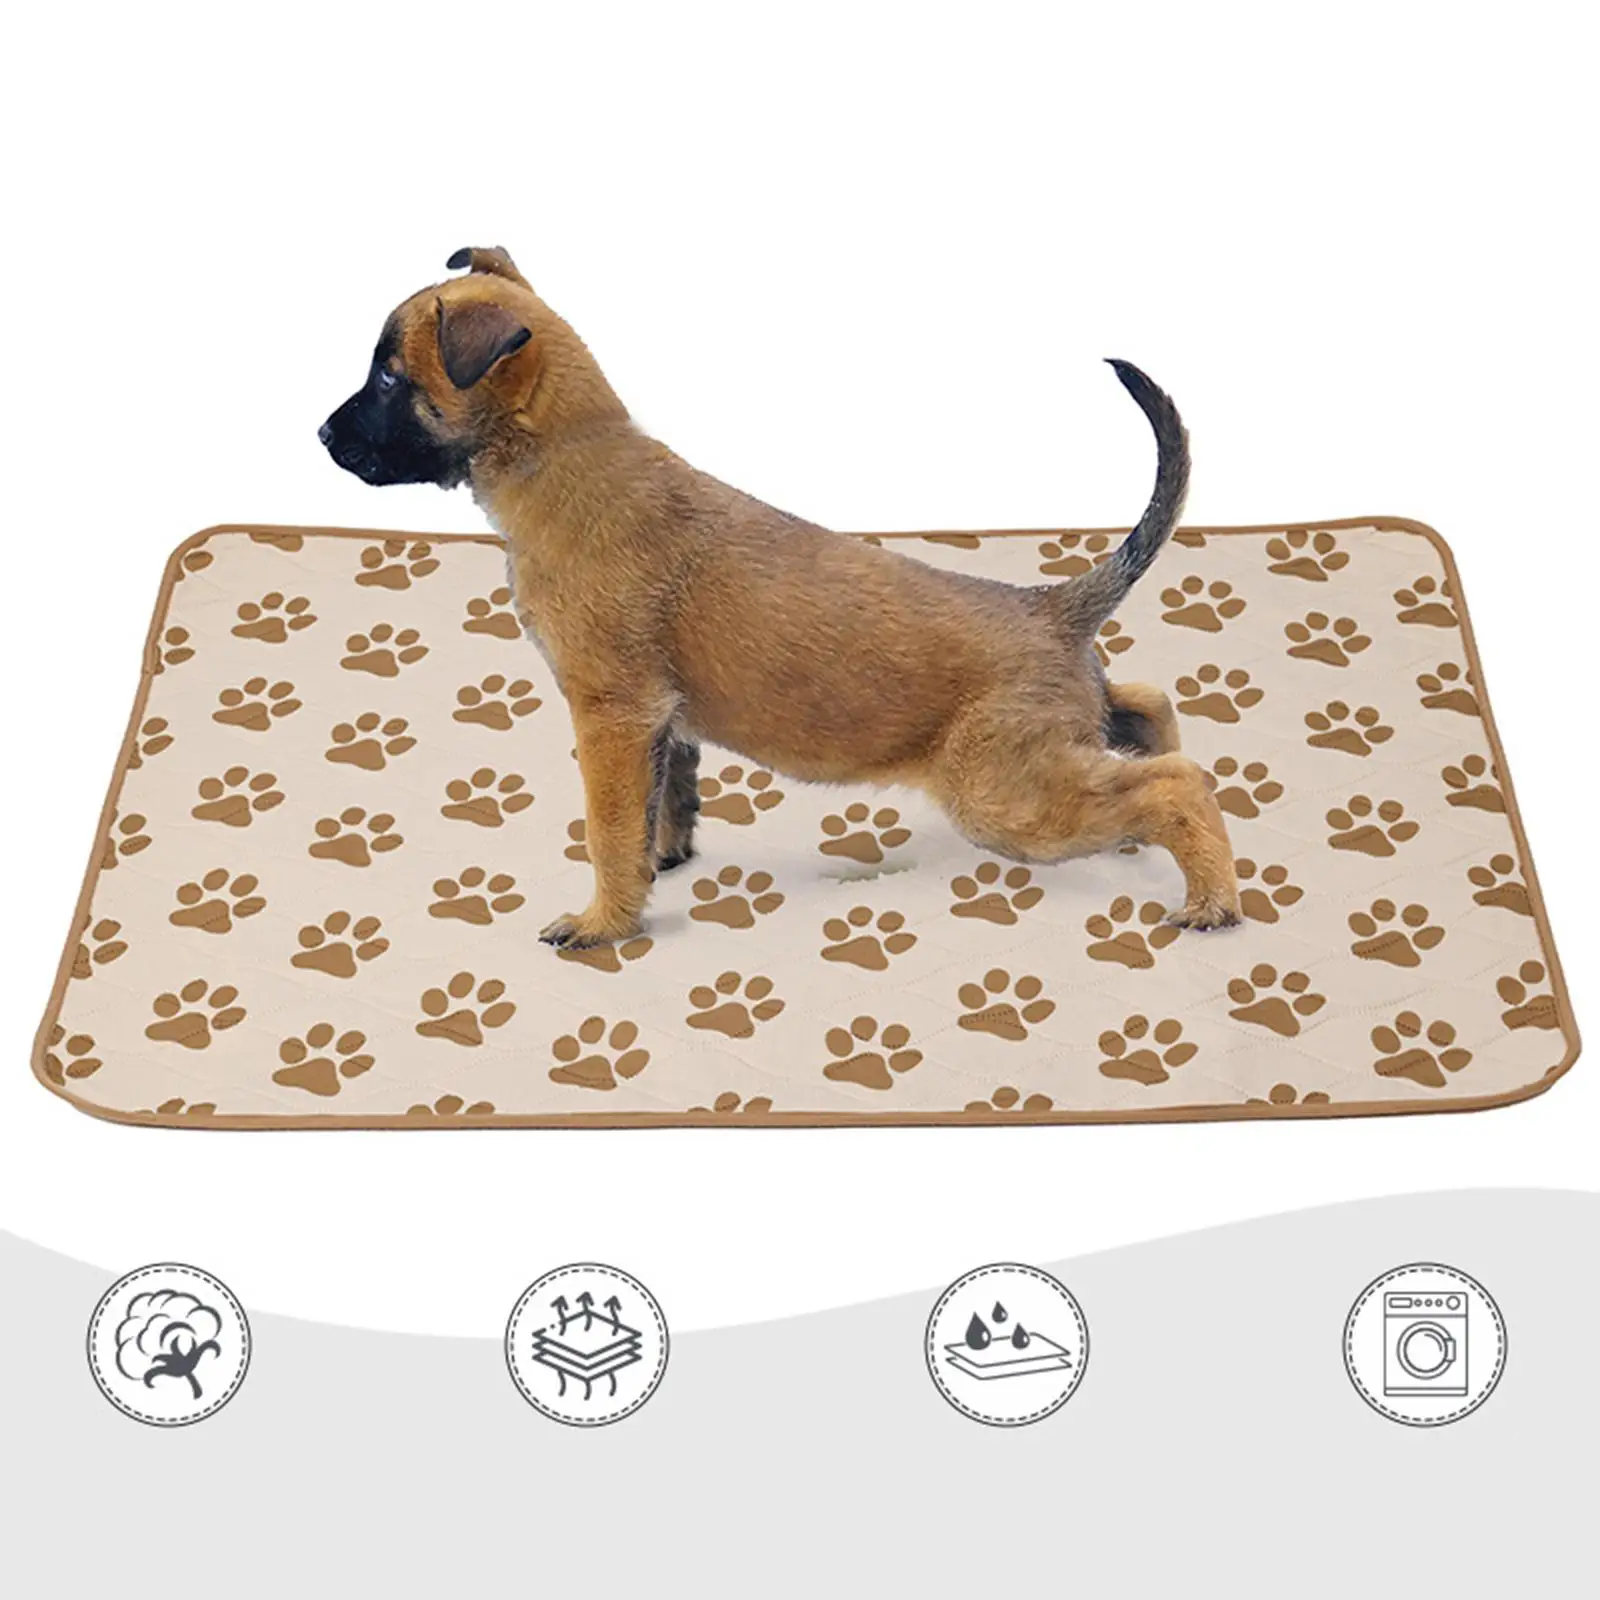 Dog Pee Pad Waterproof Blanket Breathable Reusable Mat Cage Supplies